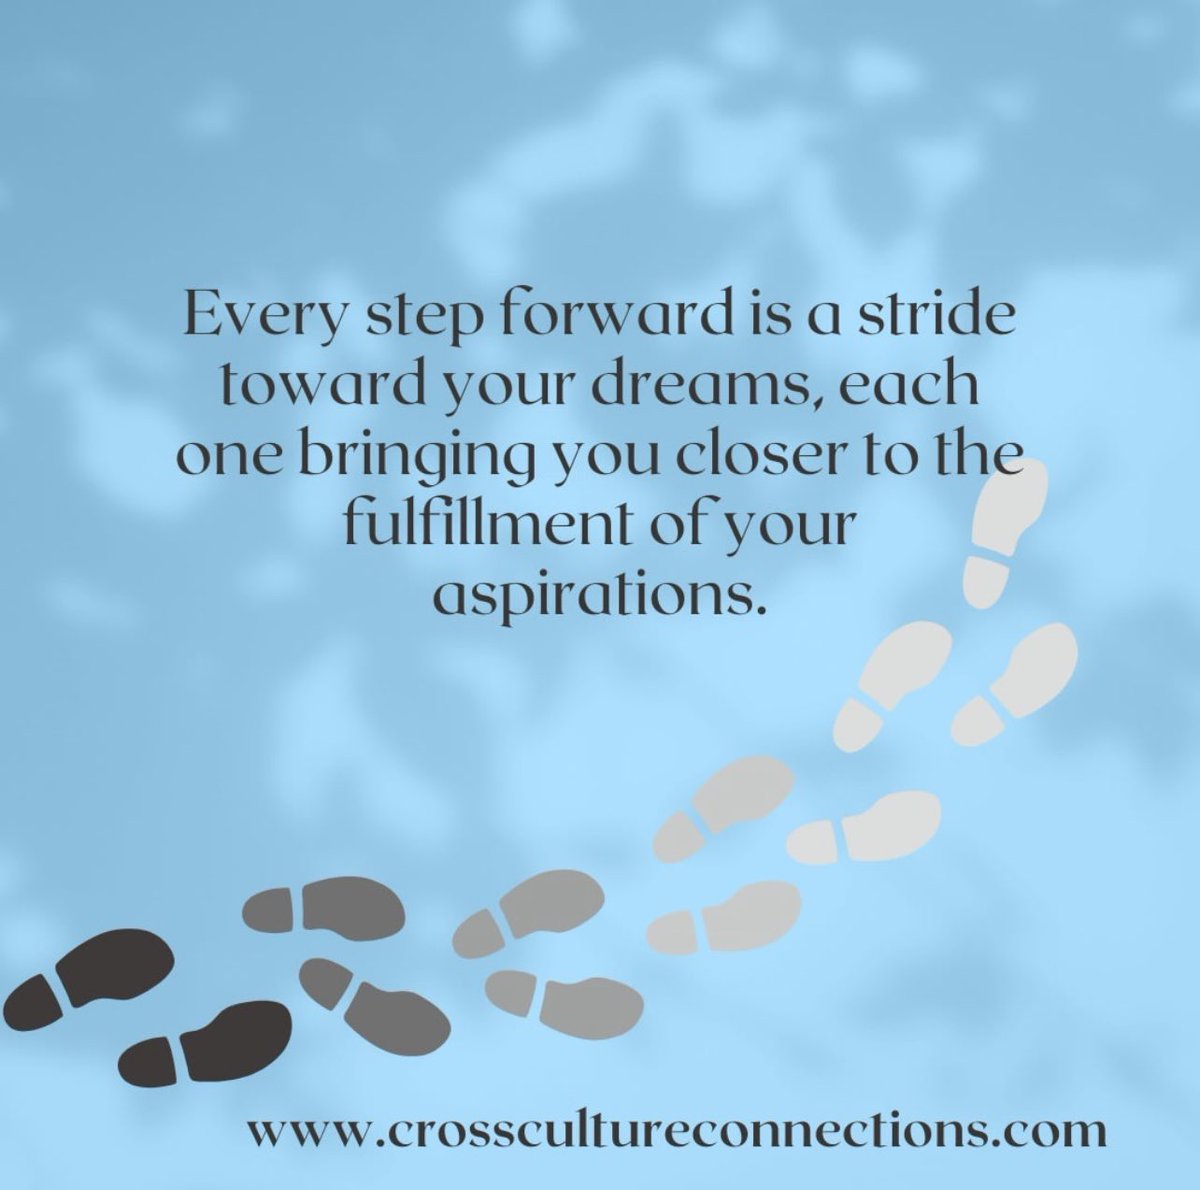 #Success is not an easy path! It takes putting one foot in front of the other to obtain your #goals. #CrossCultureConnections and our #SPINMethod is here to #help! Visit crosscultureconnections.com to learn more and see how our #tools and #resources can benefit you!

#money #travel